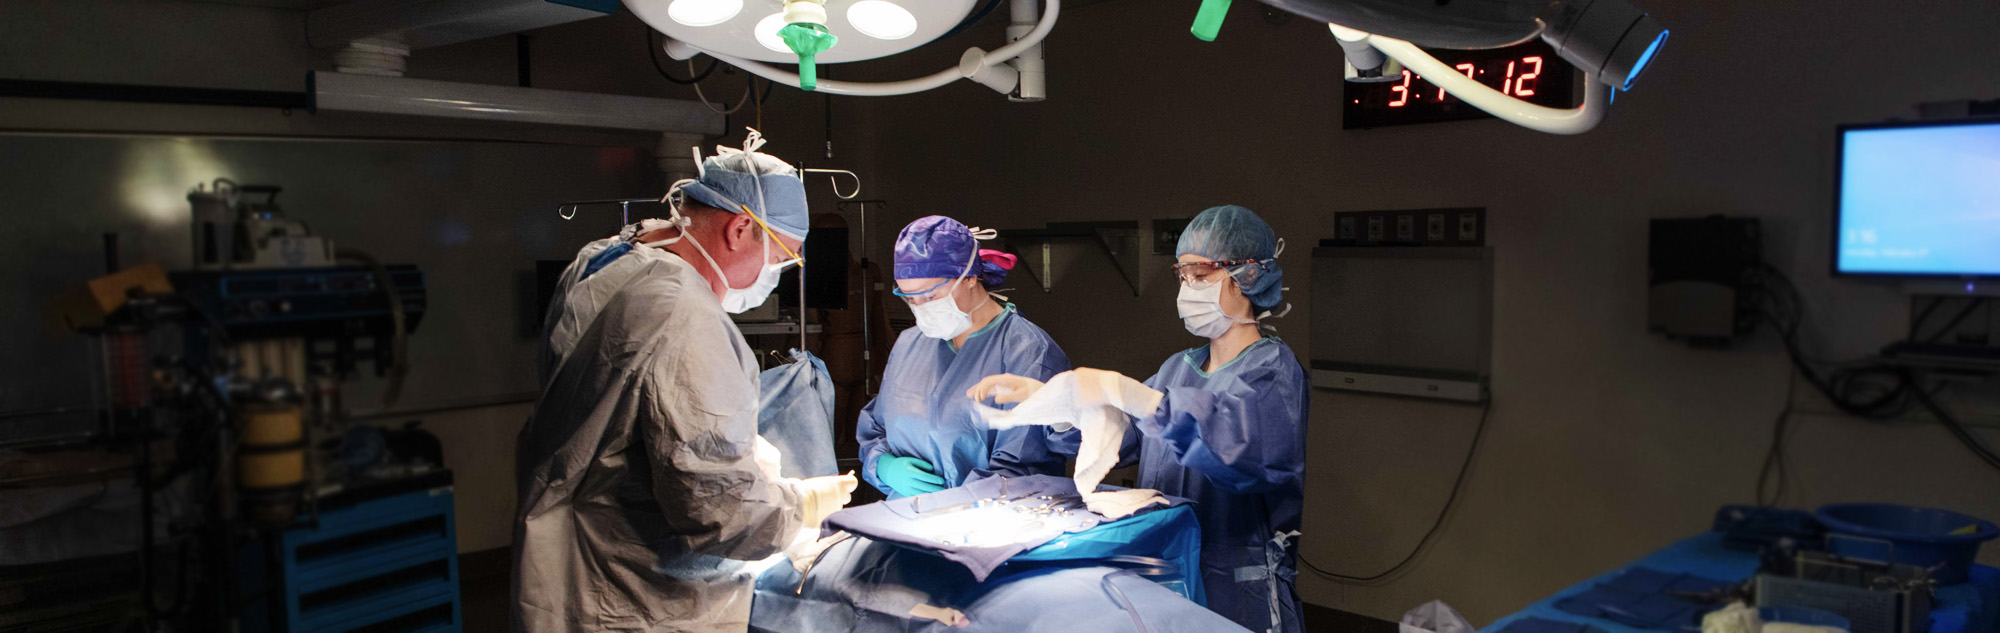 Surgical technology students and faculty work in operating room lab.